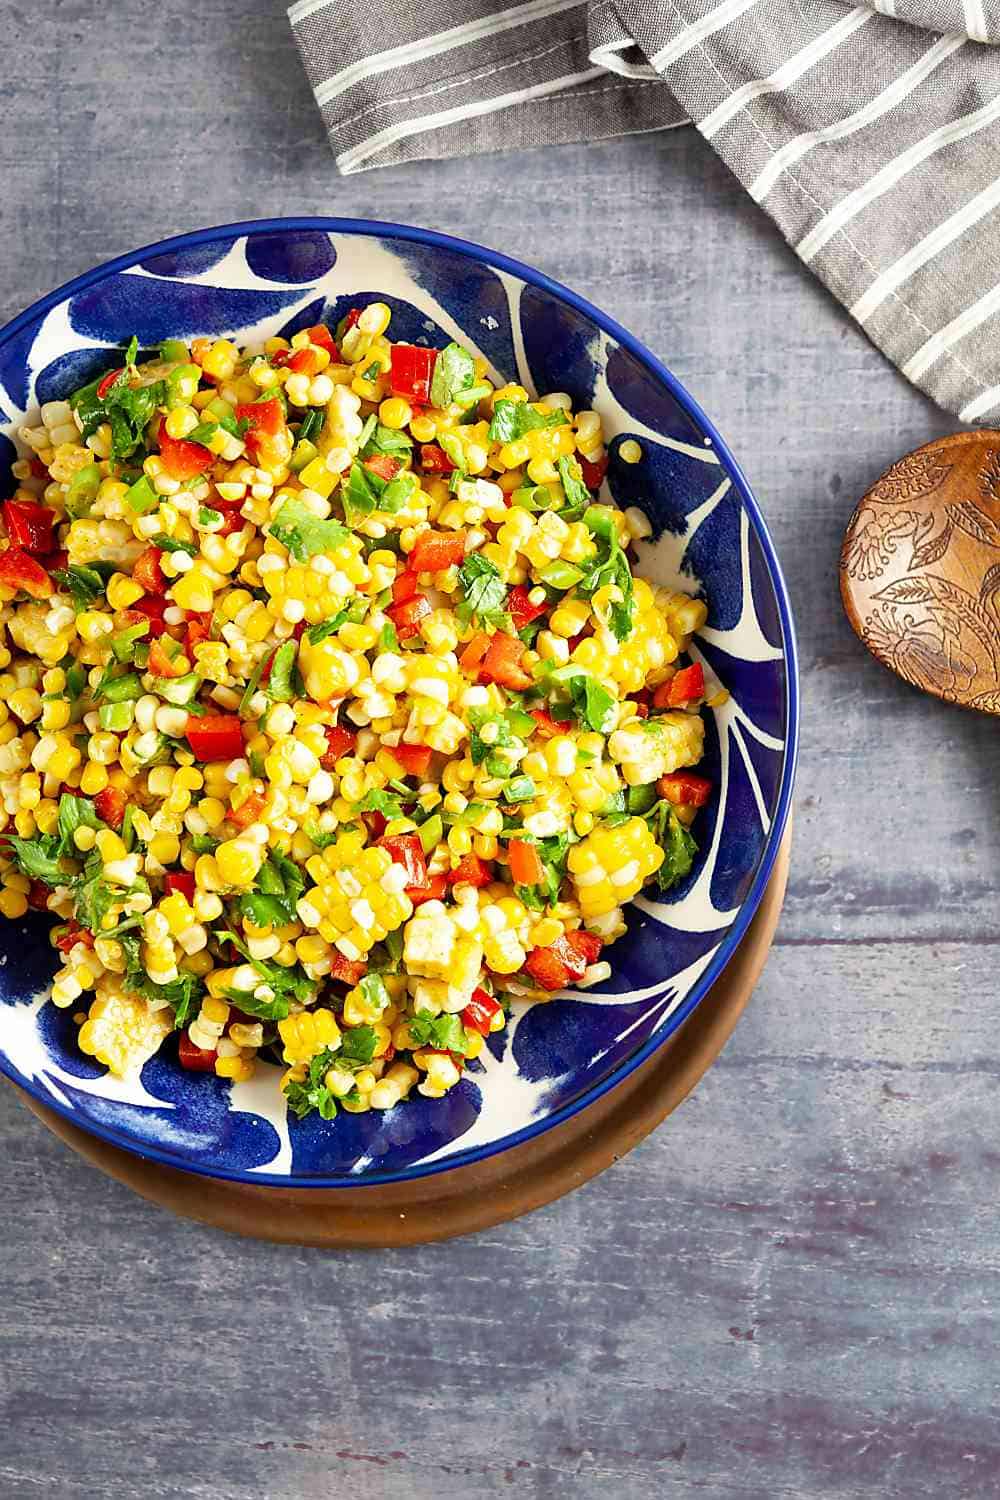 Bowl of Corn Salad with a serving spoon and a napkin